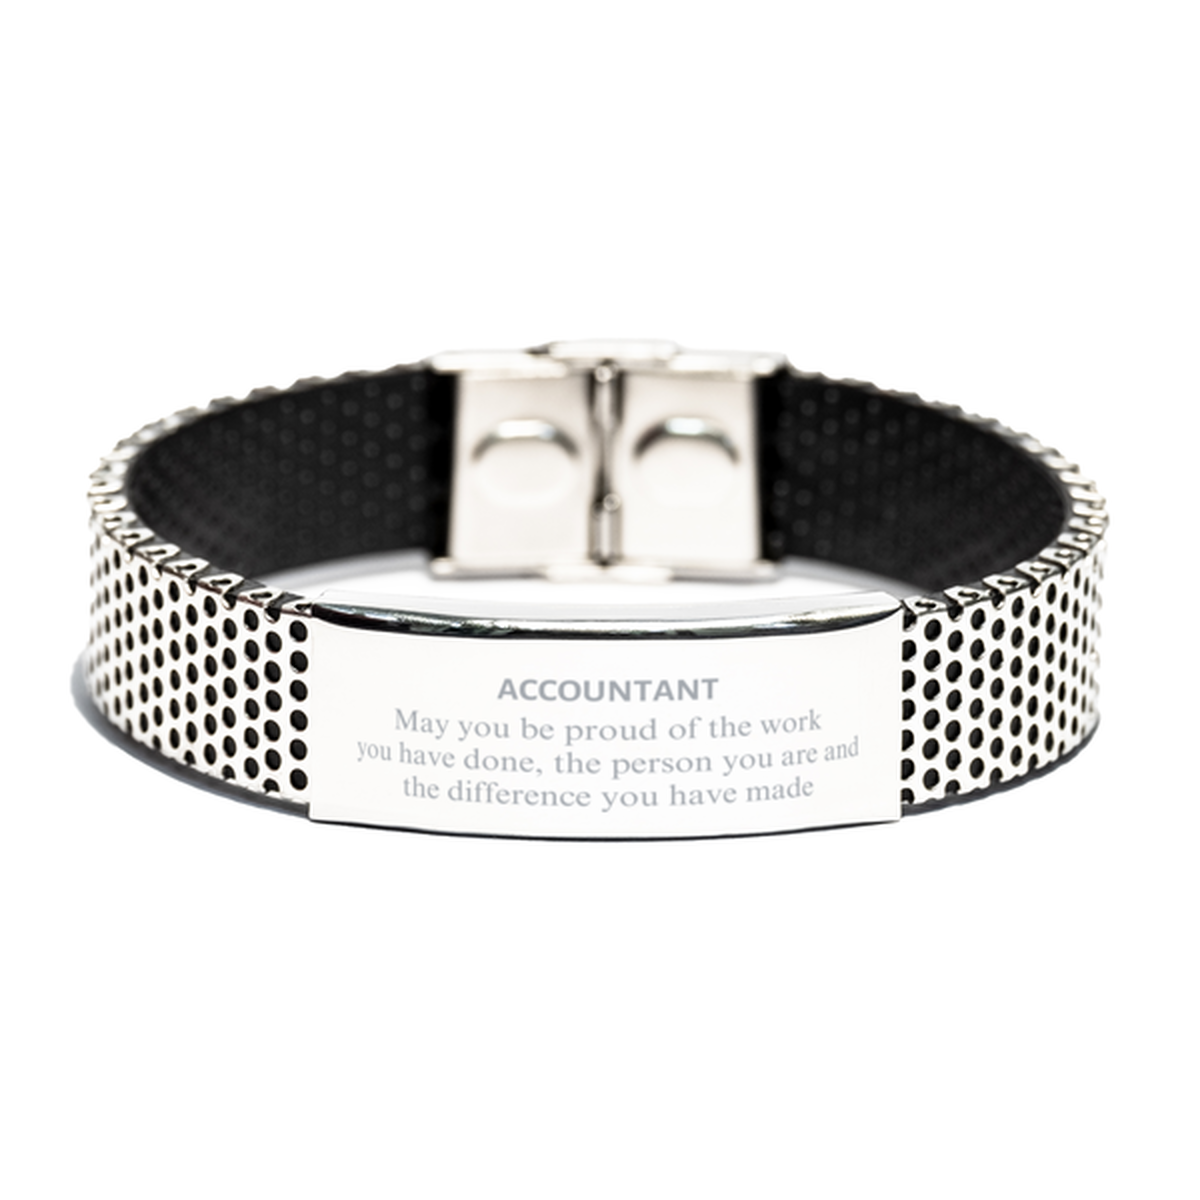 Accountant May you be proud of the work you have done, Retirement Accountant Stainless Steel Bracelet for Colleague Appreciation Gifts Amazing for Accountant